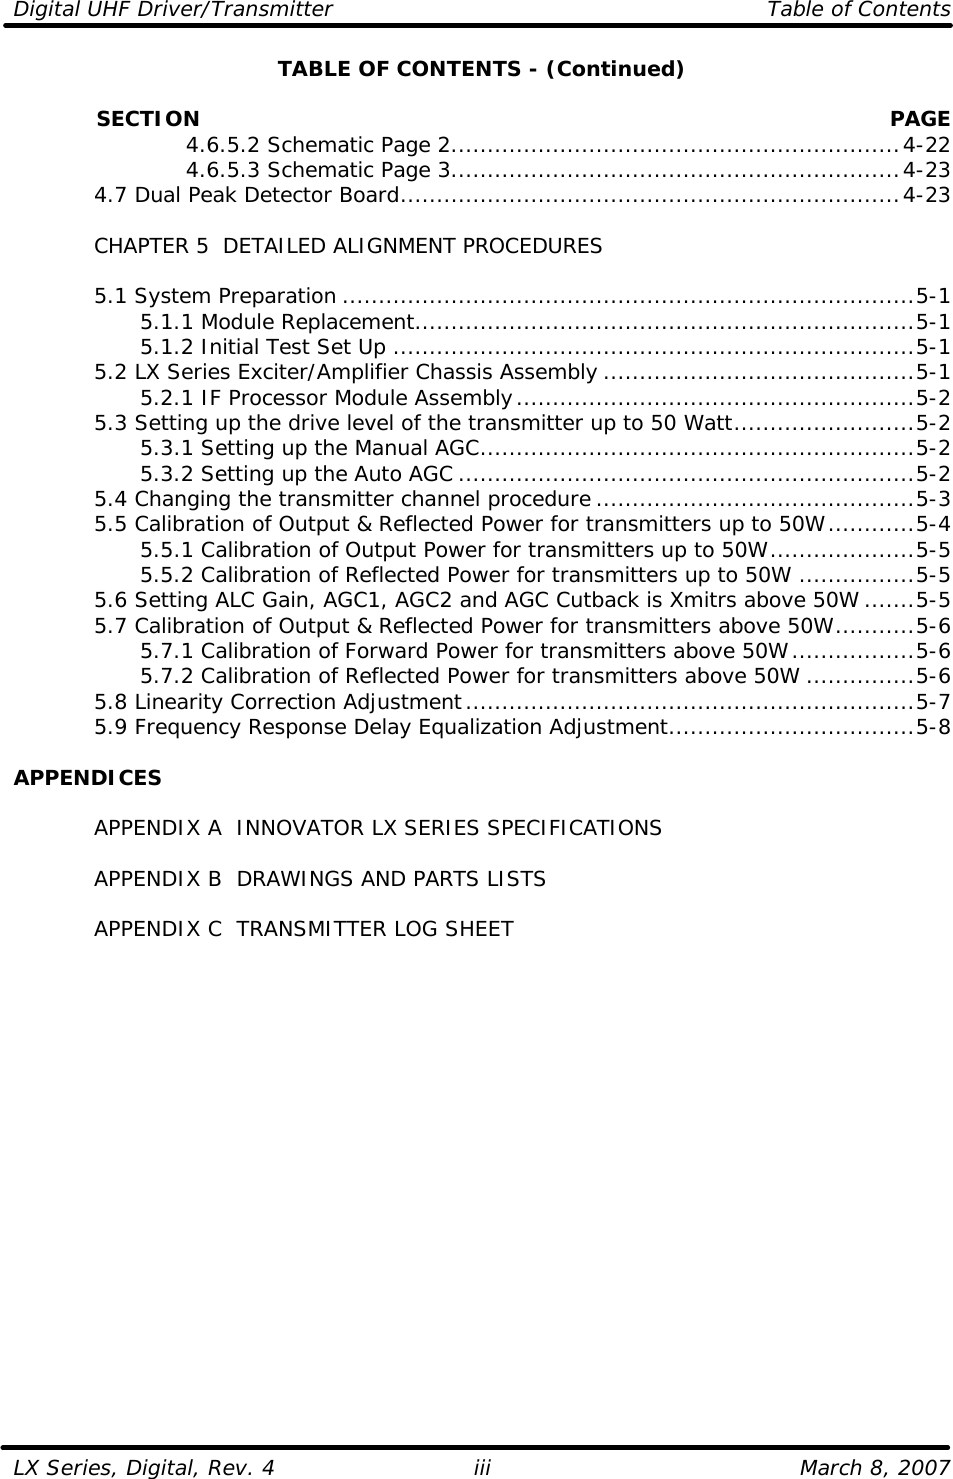 Digital UHF Driver/Transmitter    Table of Contents  LX Series, Digital, Rev. 4    March 8, 2007 iiiTABLE OF CONTENTS - (Continued)              SECTION PAGE     4.6.5.2 Schematic Page 2..............................................................4-22     4.6.5.3 Schematic Page 3..............................................................4-23  4.7 Dual Peak Detector Board.....................................................................4-23   CHAPTER 5  DETAILED ALIGNMENT PROCEDURES   5.1 System Preparation ...............................................................................5-1     5.1.1 Module Replacement.....................................................................5-1     5.1.2 Initial Test Set Up ........................................................................5-1  5.2 LX Series Exciter/Amplifier Chassis Assembly ...........................................5-1     5.2.1 IF Processor Module Assembly.......................................................5-2  5.3 Setting up the drive level of the transmitter up to 50 Watt.........................5-2     5.3.1 Setting up the Manual AGC............................................................5-2     5.3.2 Setting up the Auto AGC ...............................................................5-2  5.4 Changing the transmitter channel procedure ............................................5-3  5.5 Calibration of Output &amp; Reflected Power for transmitters up to 50W............5-4     5.5.1 Calibration of Output Power for transmitters up to 50W....................5-5     5.5.2 Calibration of Reflected Power for transmitters up to 50W ................5-5  5.6 Setting ALC Gain, AGC1, AGC2 and AGC Cutback is Xmitrs above 50W .......5-5  5.7 Calibration of Output &amp; Reflected Power for transmitters above 50W...........5-6     5.7.1 Calibration of Forward Power for transmitters above 50W.................5-6     5.7.2 Calibration of Reflected Power for transmitters above 50W ...............5-6  5.8 Linearity Correction Adjustment..............................................................5-7  5.9 Frequency Response Delay Equalization Adjustment..................................5-8  APPENDICES   APPENDIX A  INNOVATOR LX SERIES SPECIFICATIONS   APPENDIX B  DRAWINGS AND PARTS LISTS   APPENDIX C  TRANSMITTER LOG SHEET  